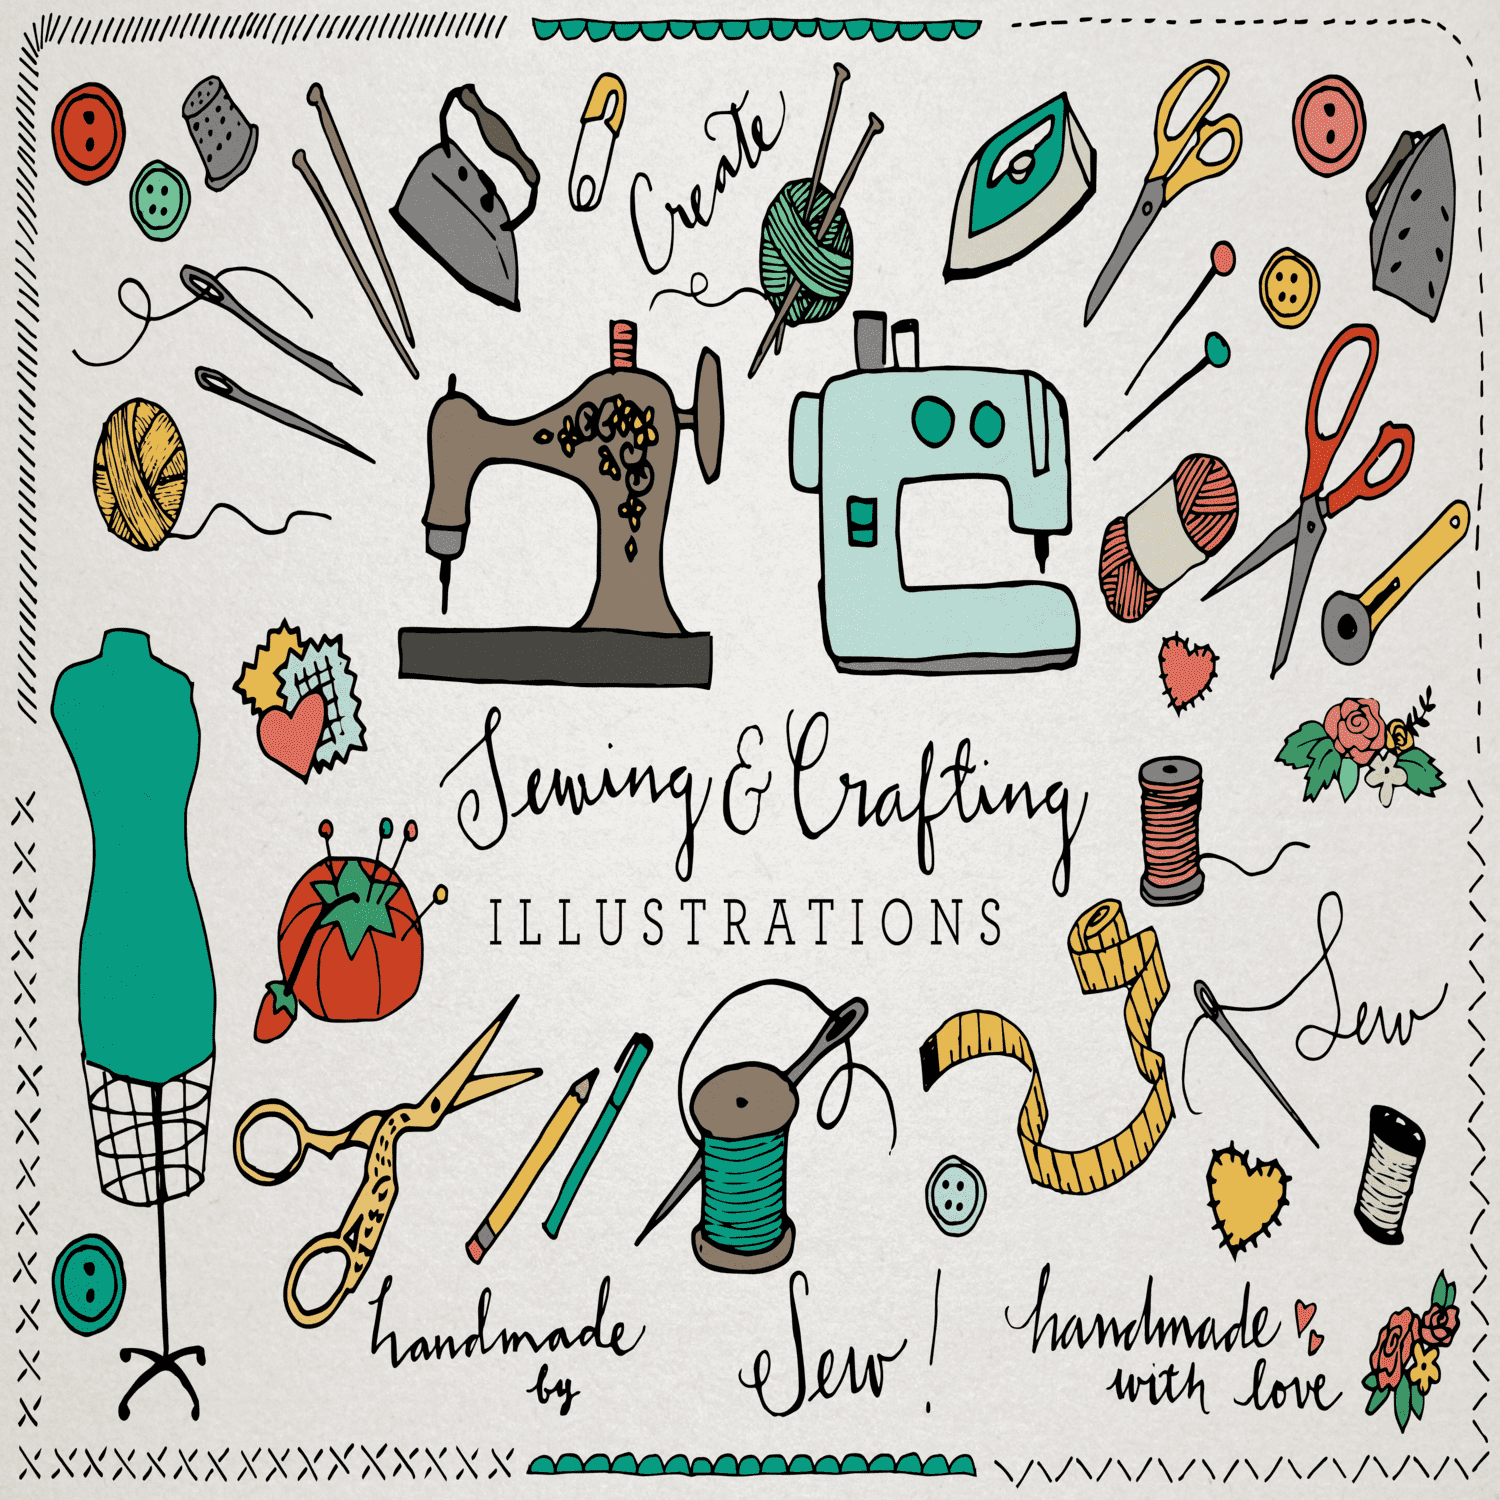 Sewing & Crafting Ilustrations Pack main cover.